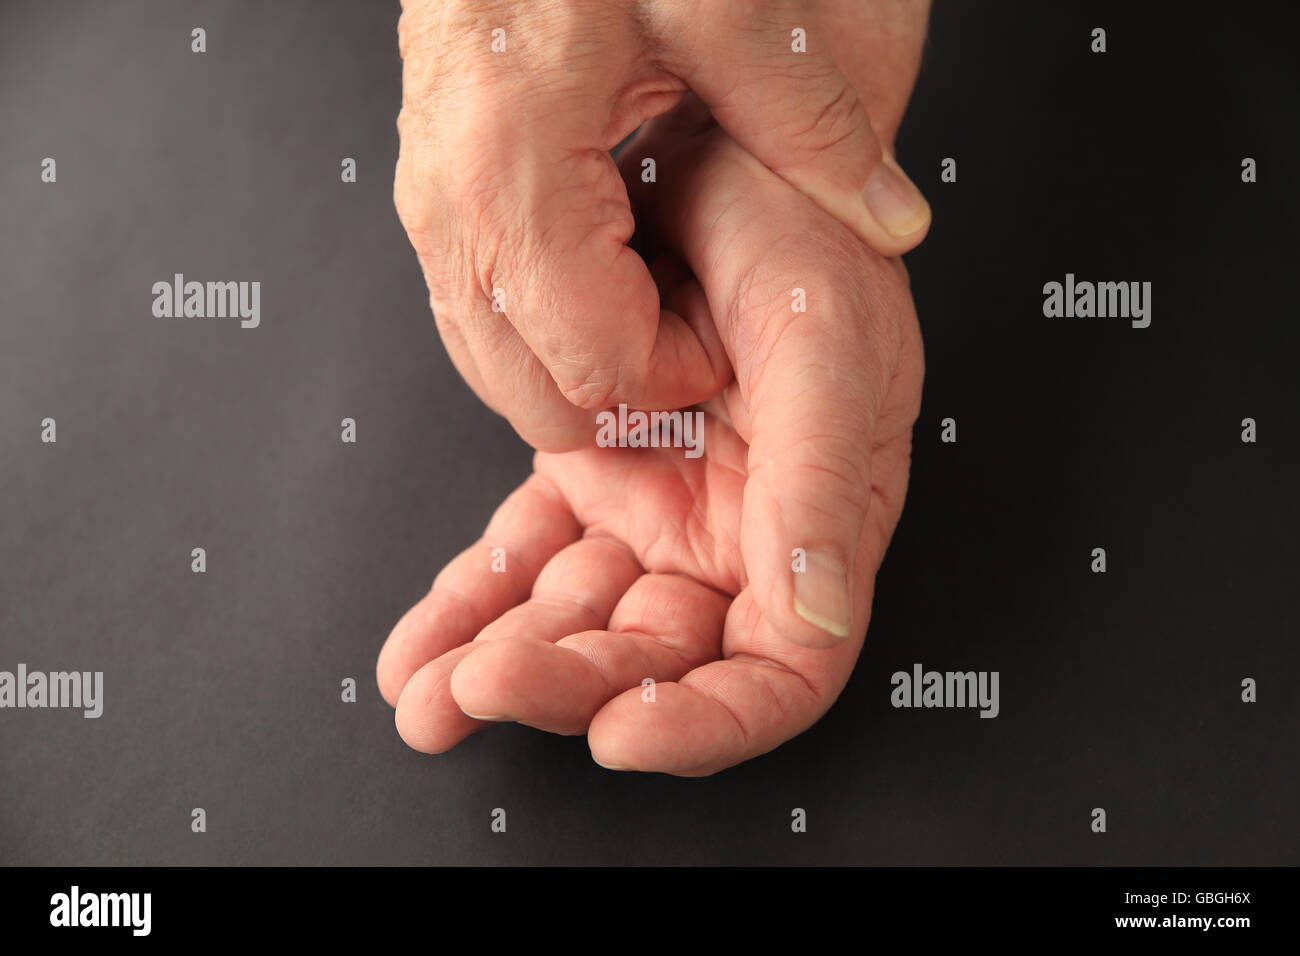 Senior man scratches an irritated area on his palm. Stock Photo